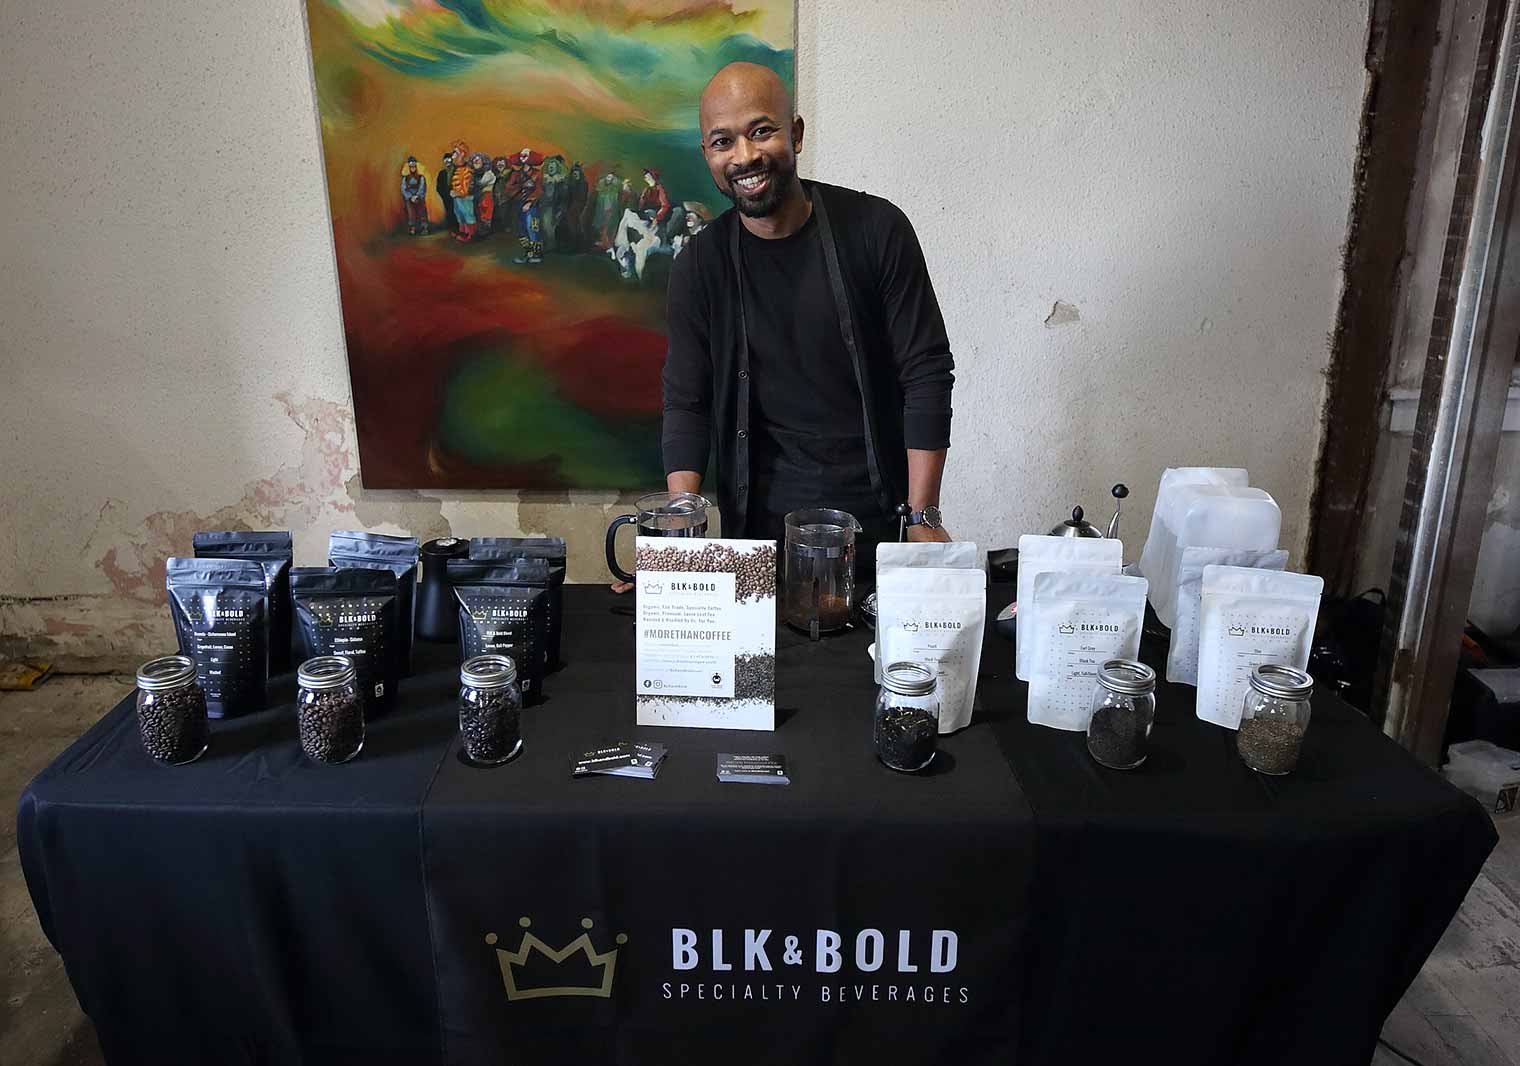 Pernell Cezar Jr. of BLK & Bold Speciality Beverages at Silent Rivers 25th Anniversary dsm Unveiling